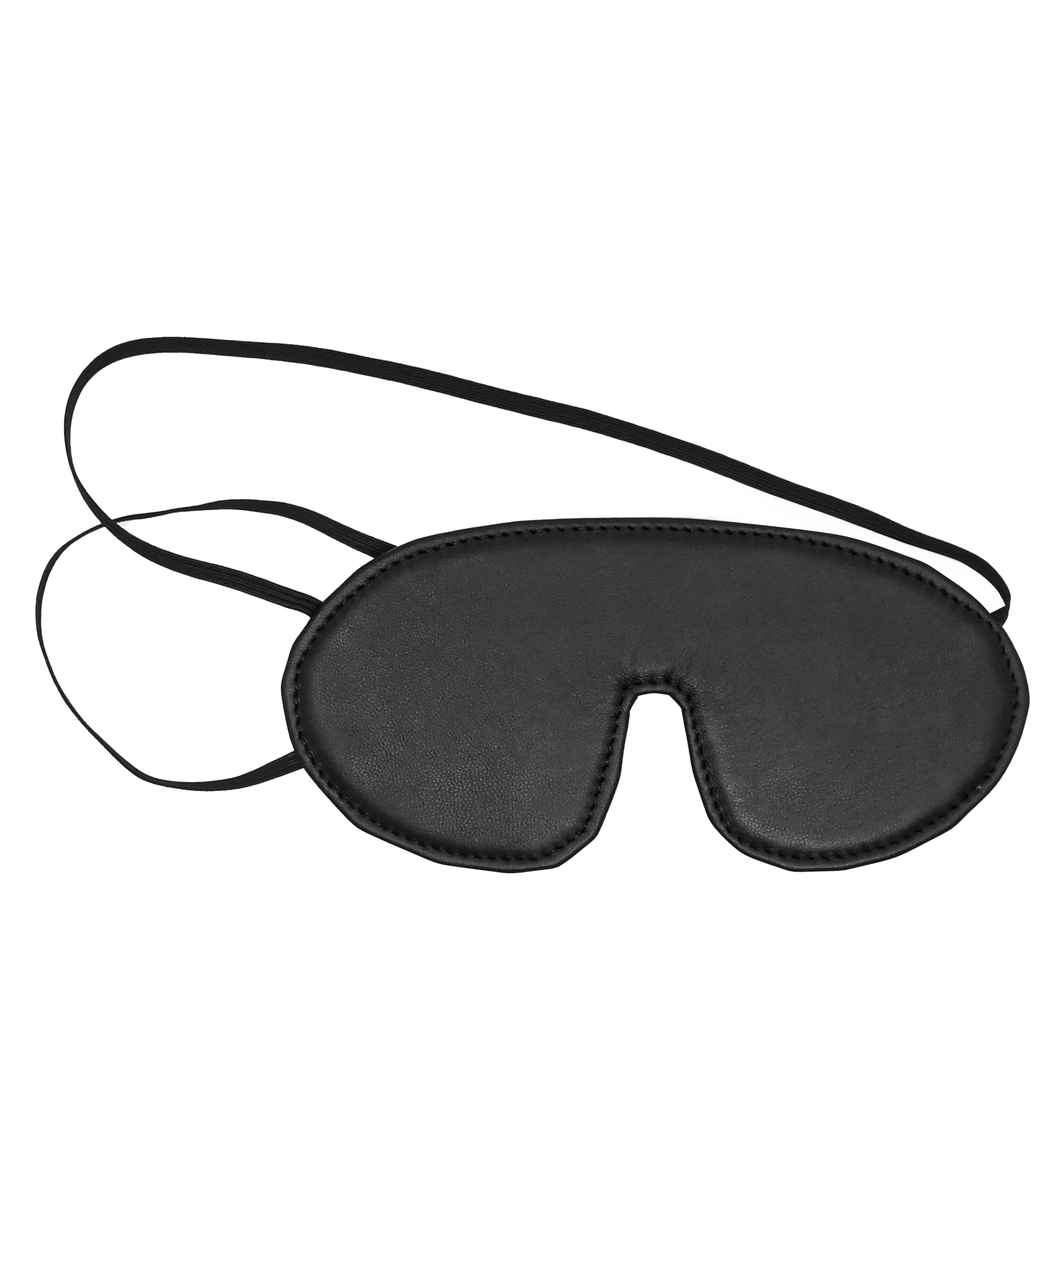 SexyStyle black leather blindfold